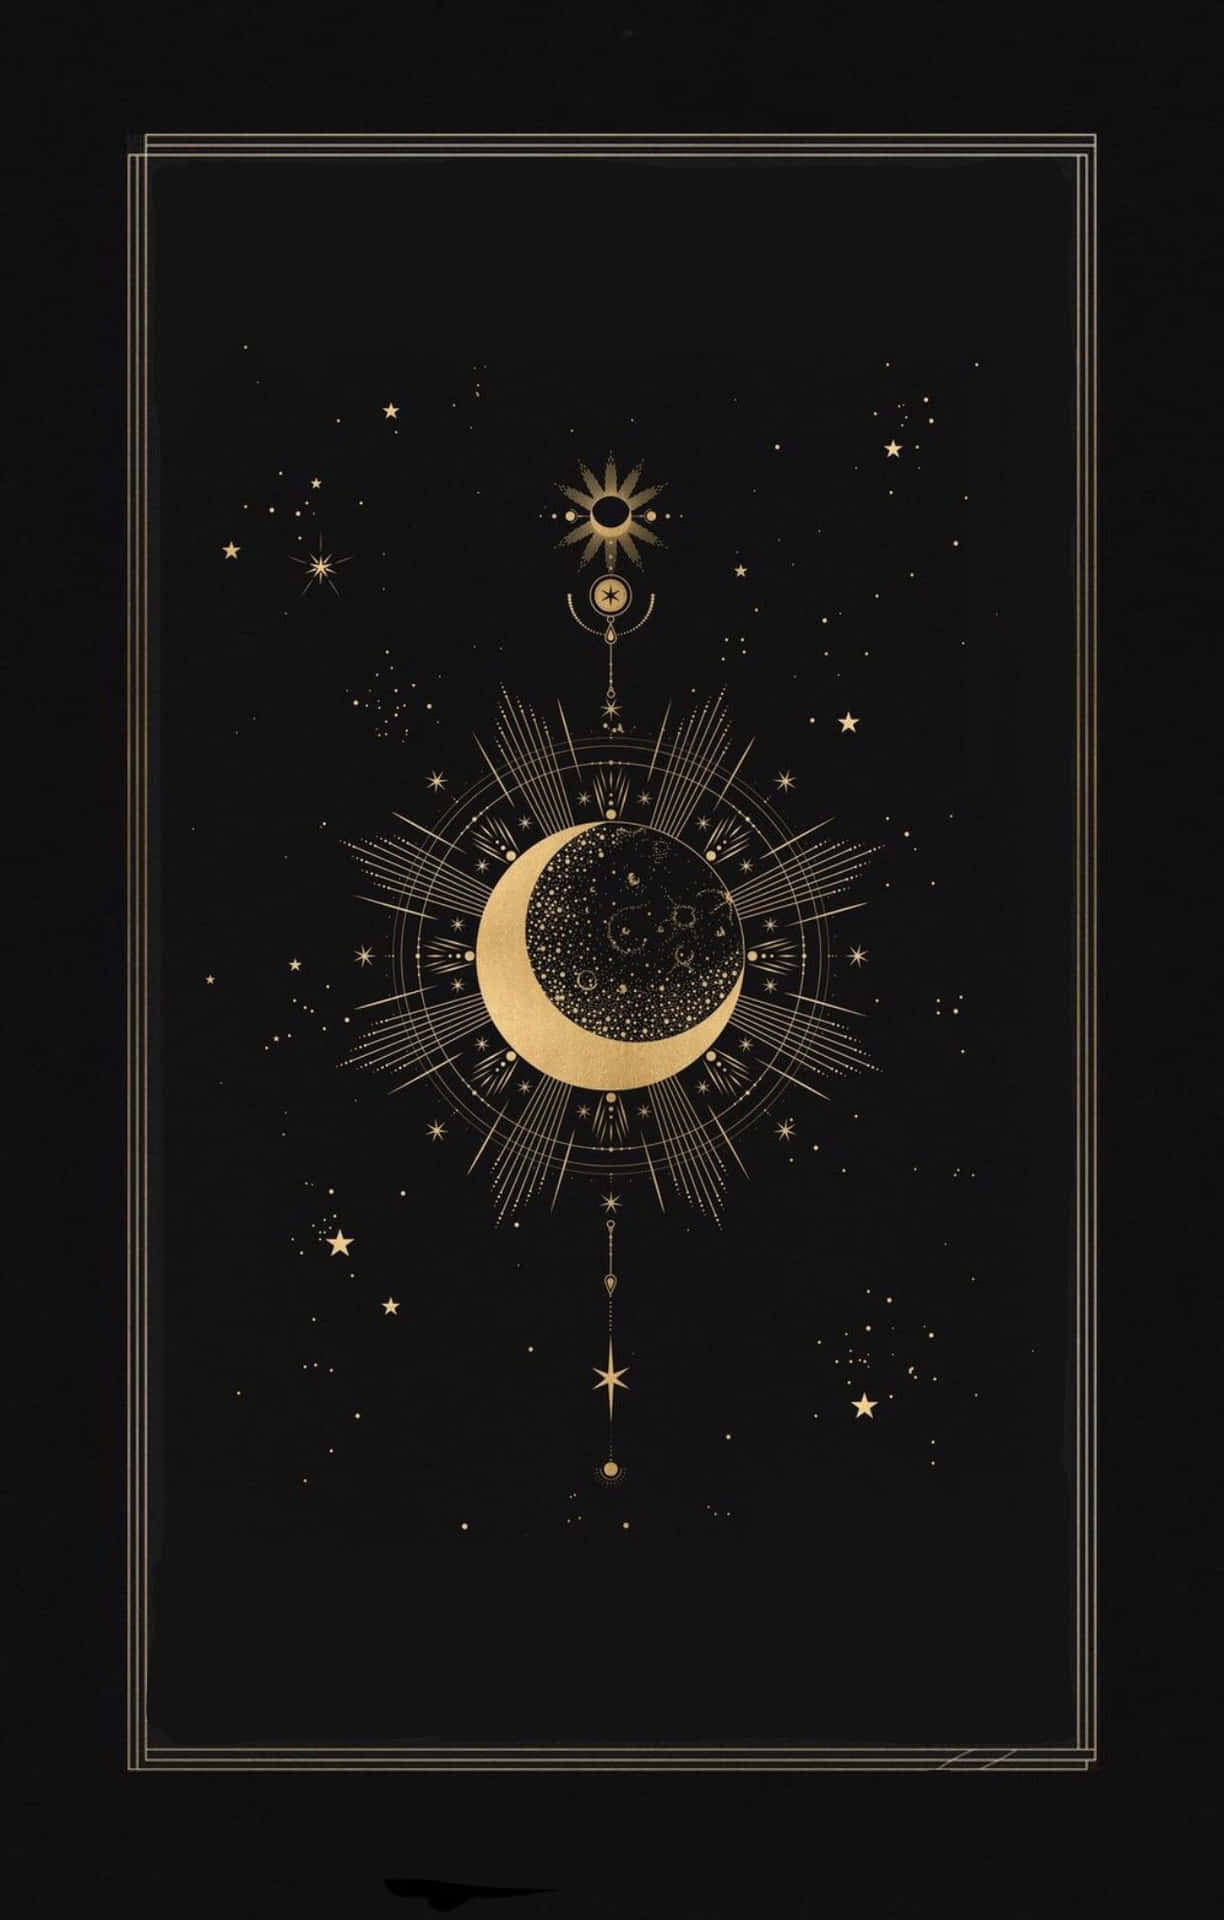 15 Free Celestial iPhone Wallpapers  Soul of Stevie  Art wallpaper iphone  Iphone wallpaper Phone wallpaper